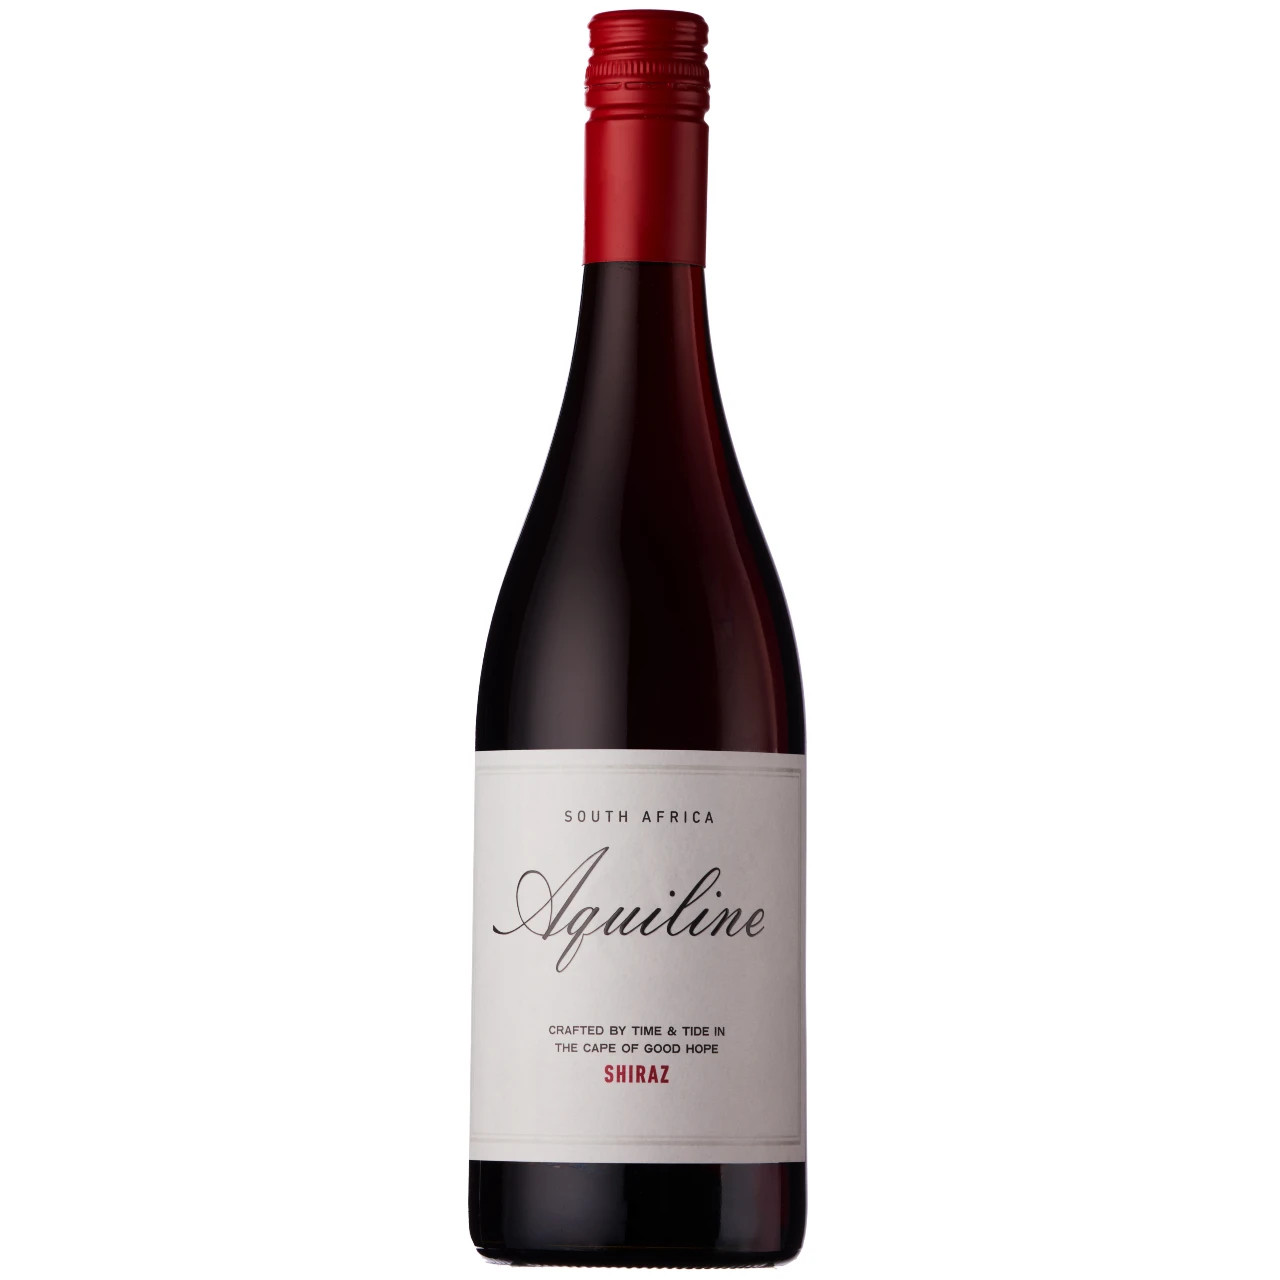 Aquiline Shiraz is a supple and tasty South African Shiraz in a fresh, approachable style.